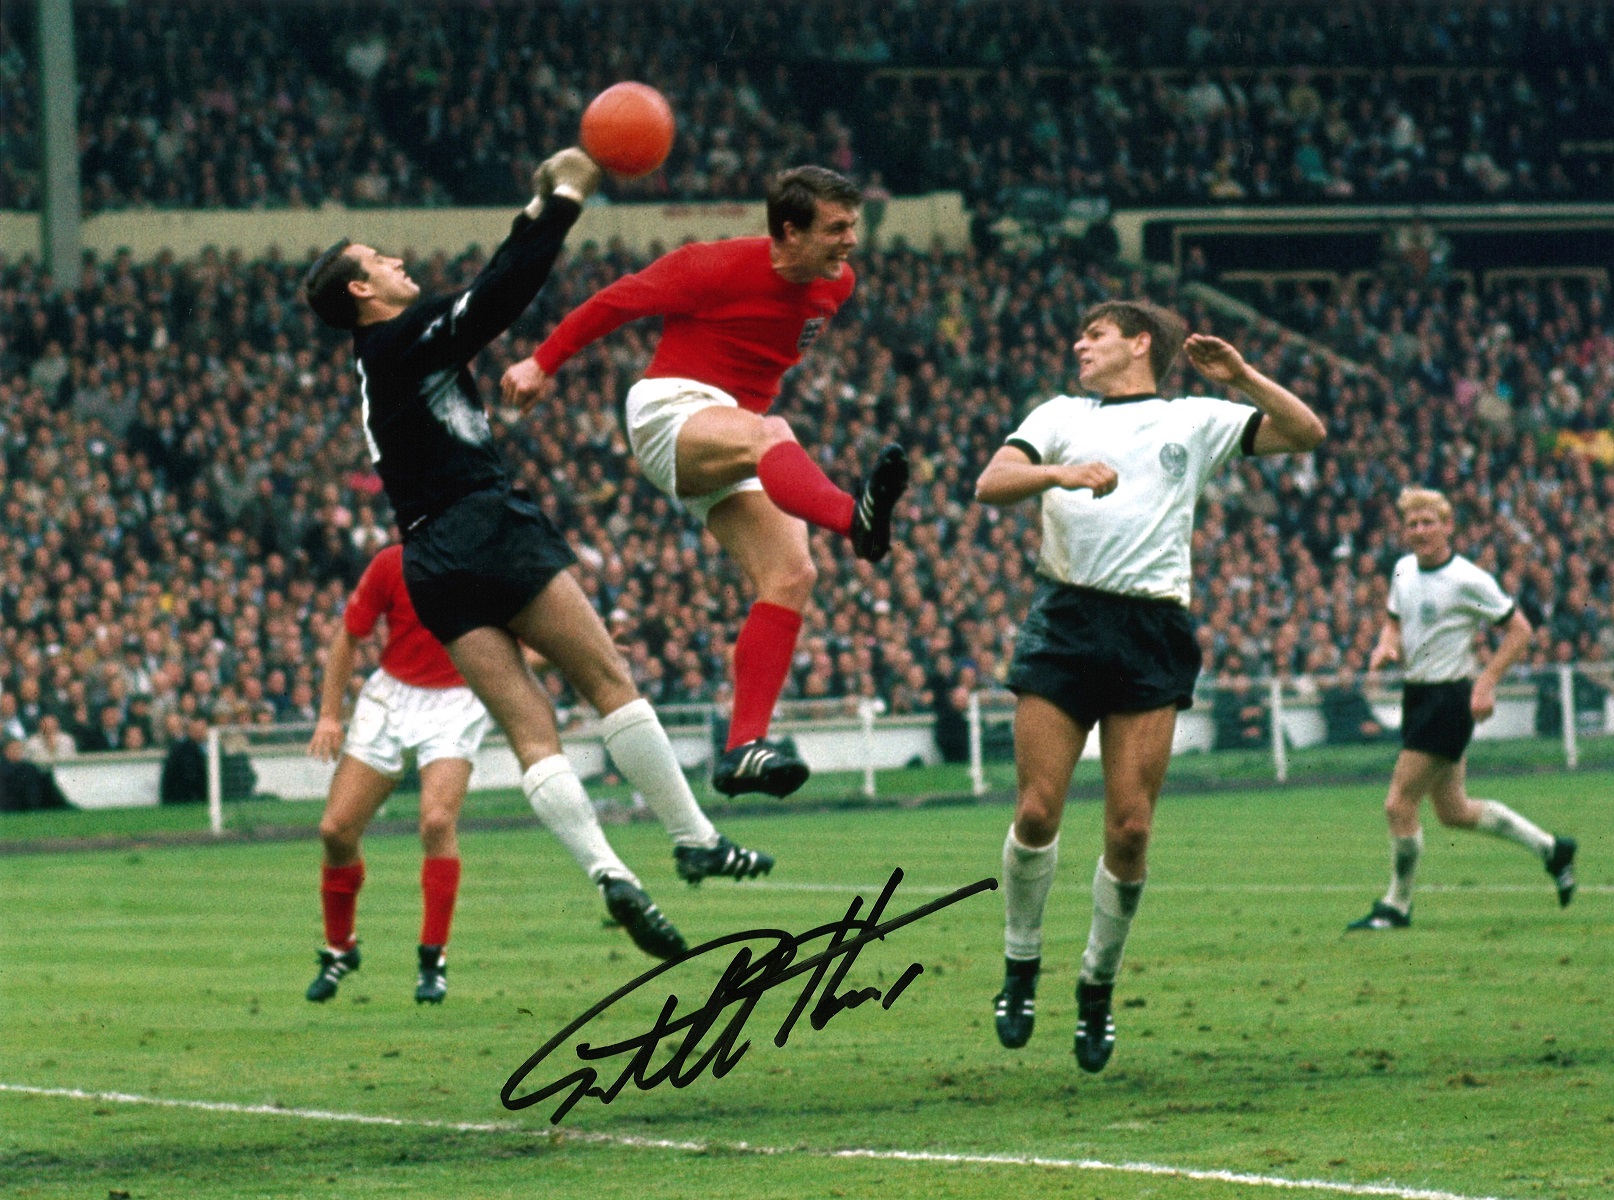 Football, Sir Geoff Hurst signed 16x12 colour photograph pictured during his famed hat trick game